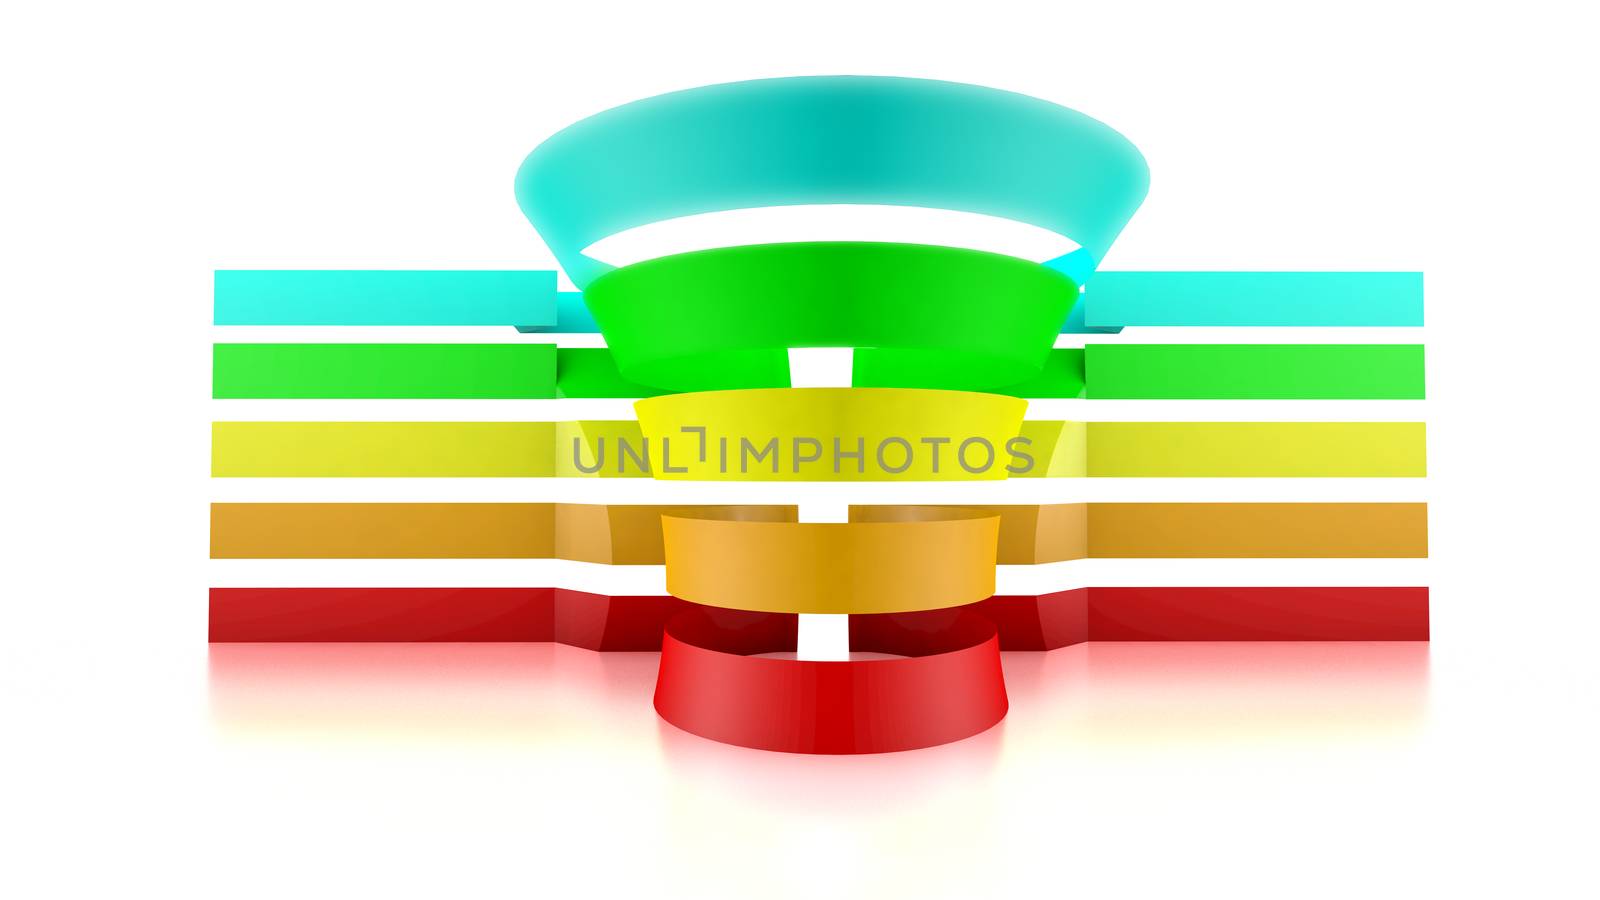 3D funnel with five colored tape. Space available for text and values. 3D Rendering